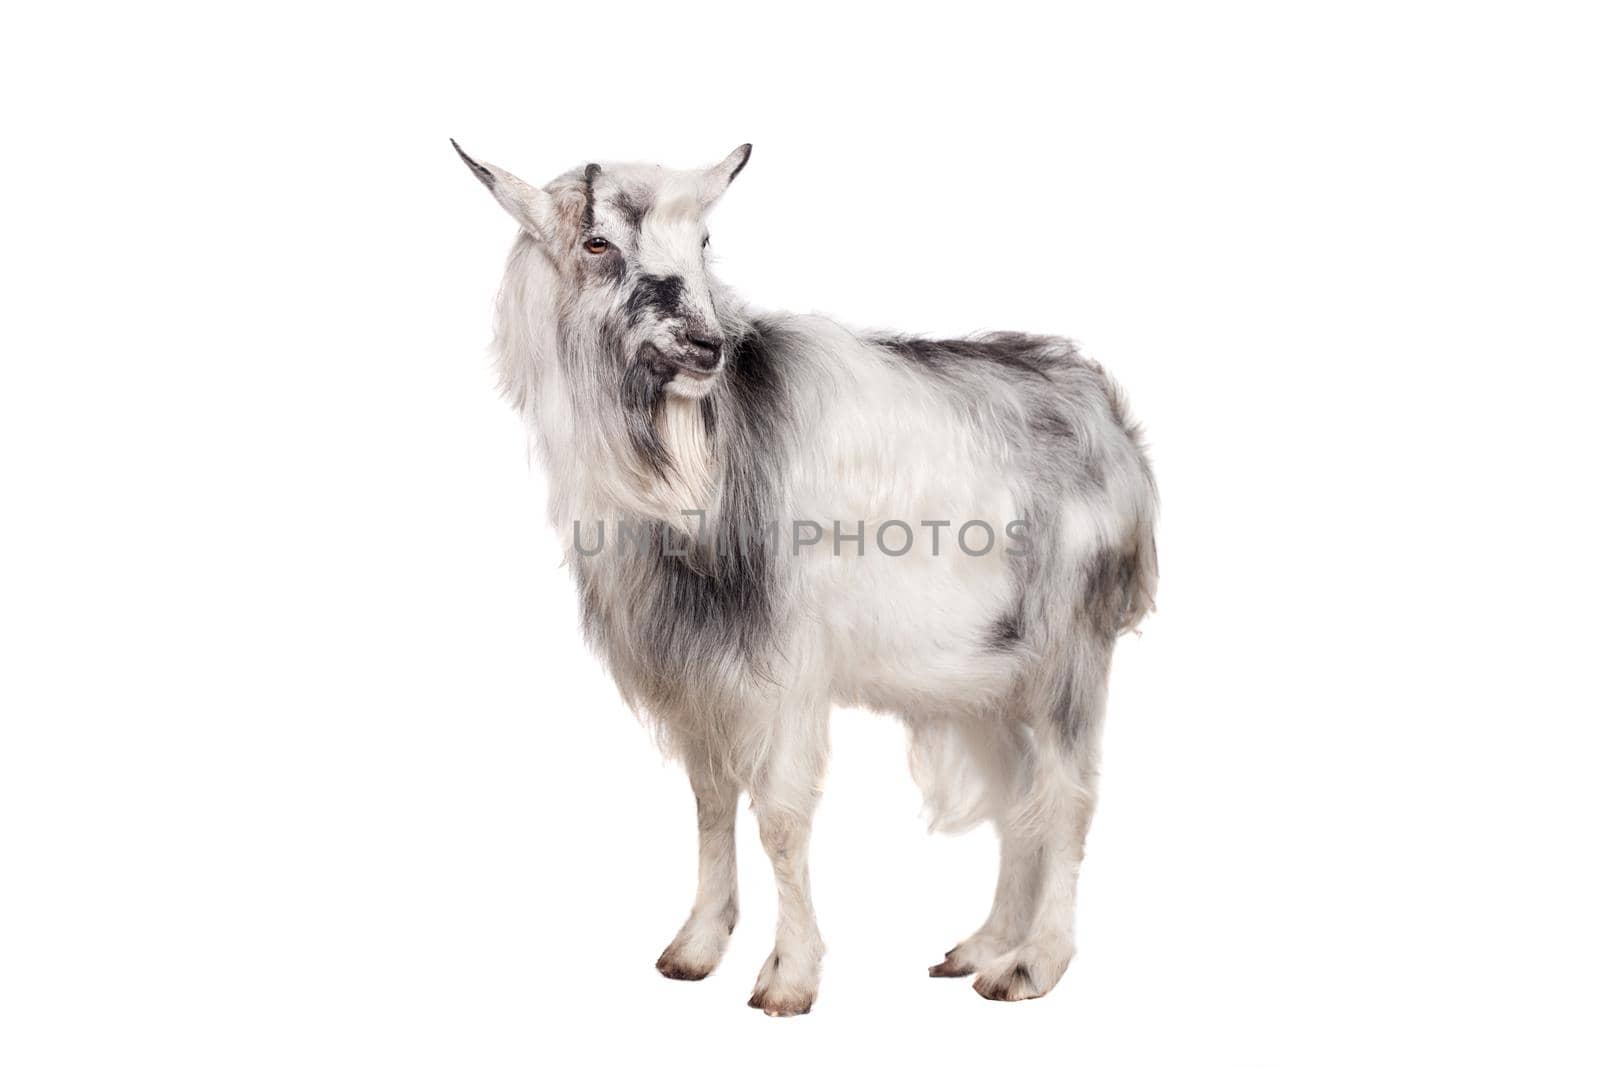 Gray goat on white by RosaJay